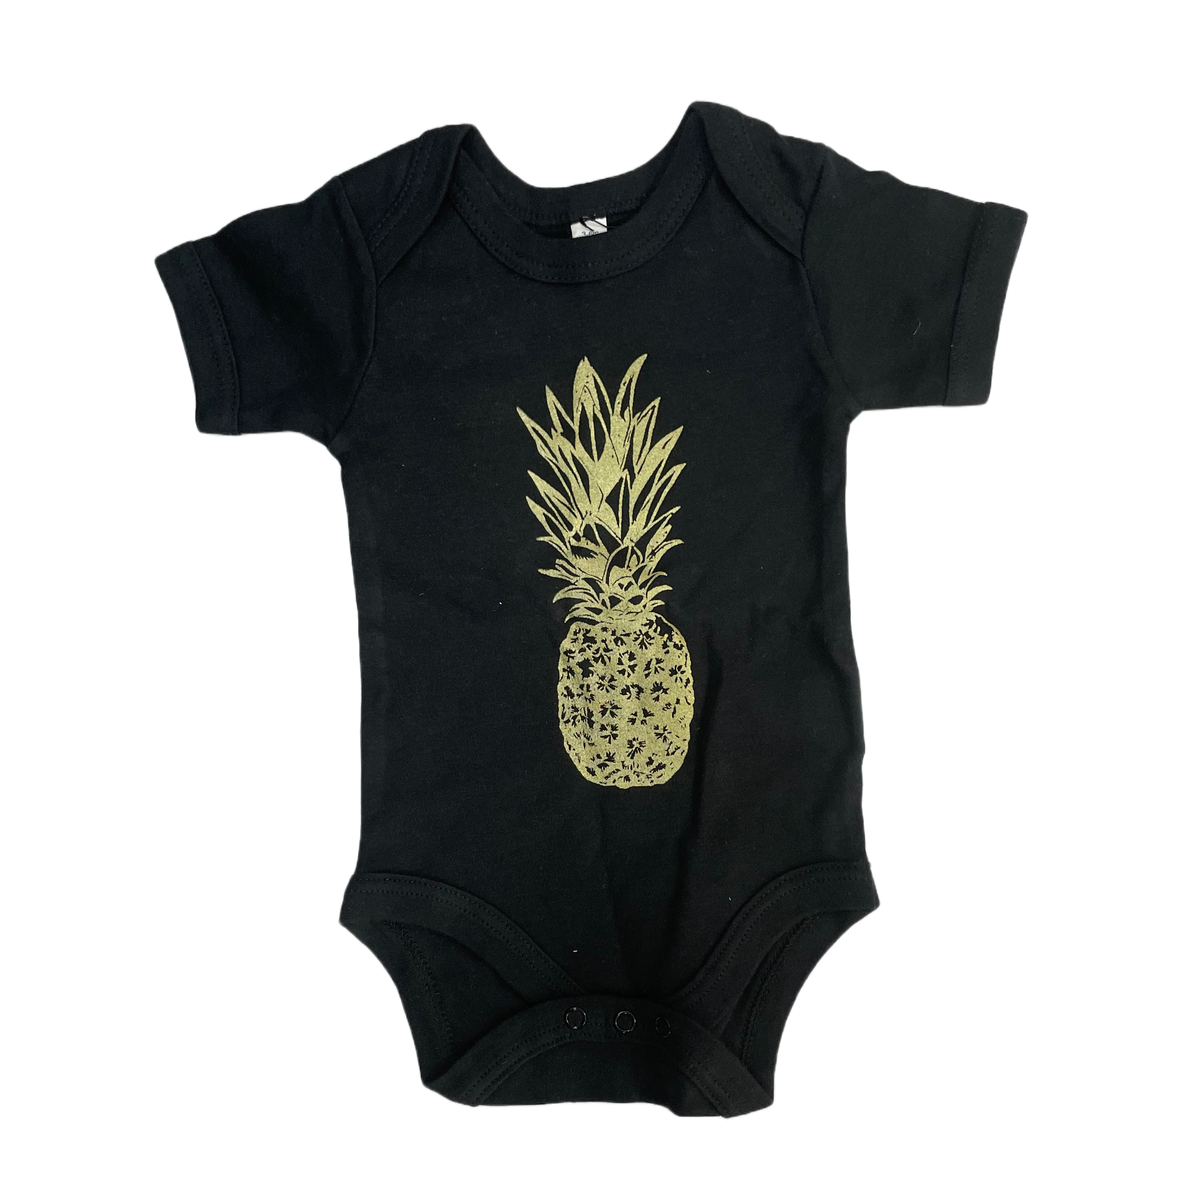 Baba Box Outlet - Pineapple Bodysuit